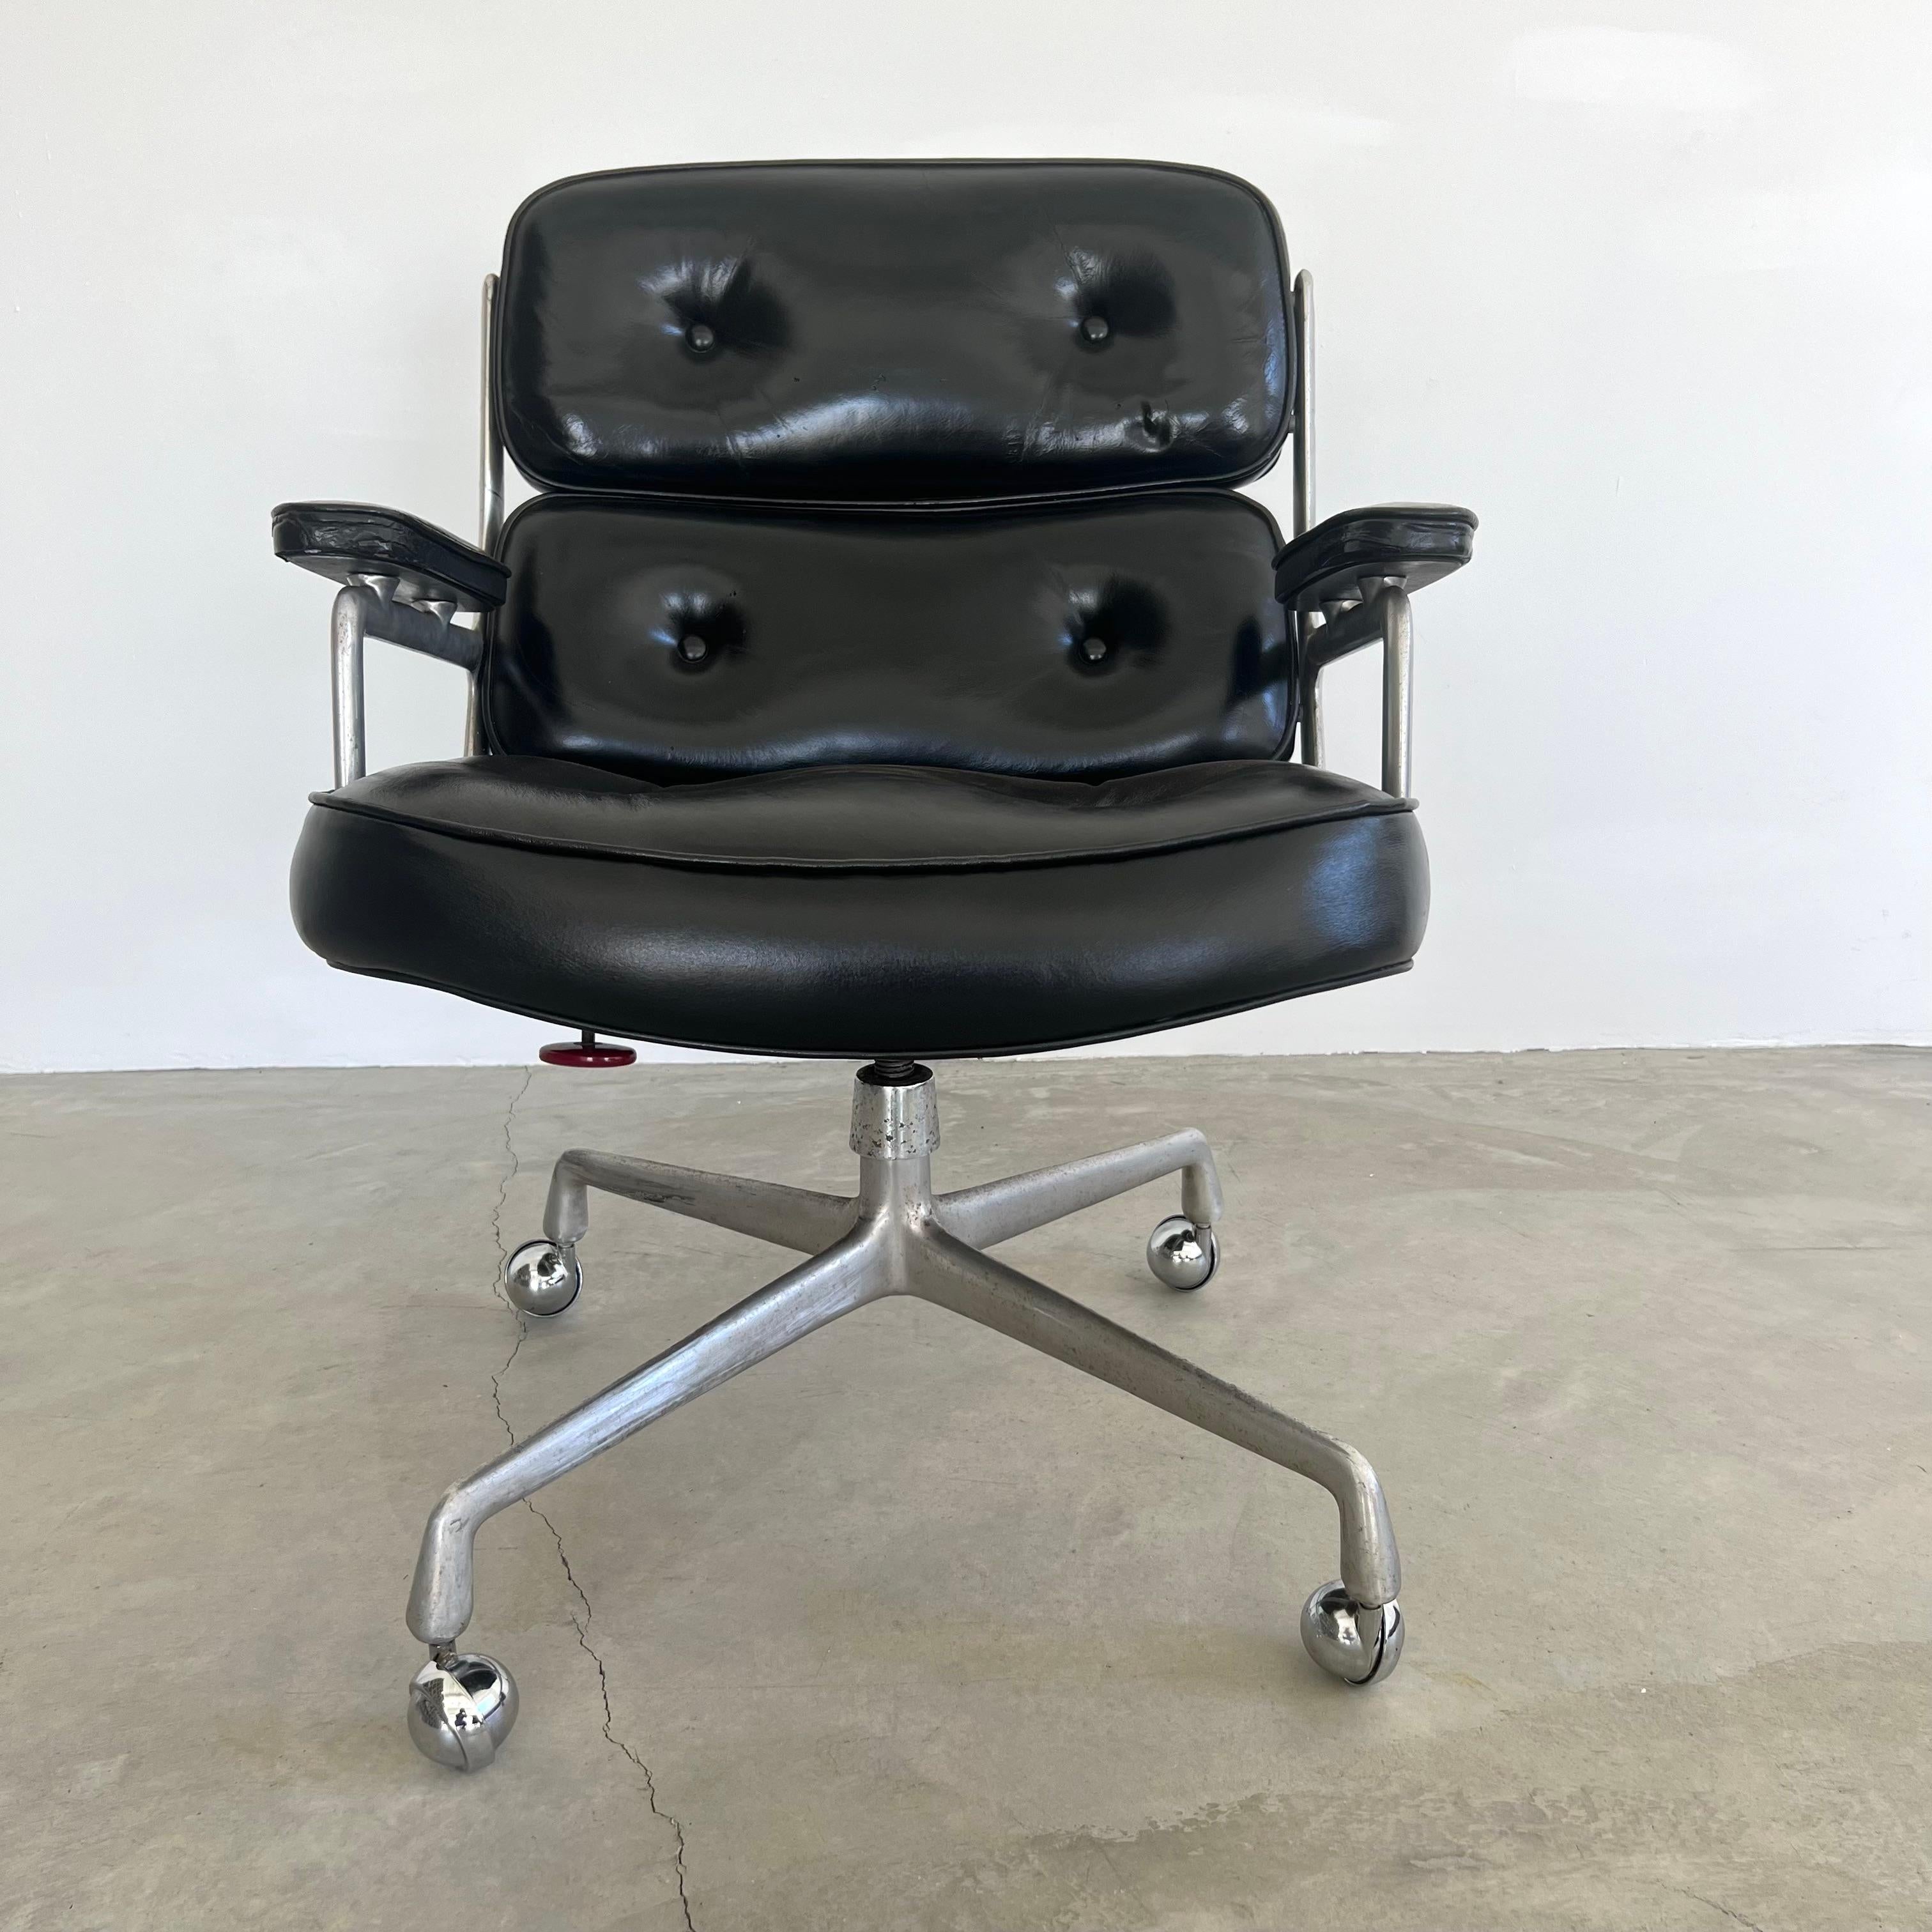 Classic Eames Time Life swivel chair in black leather for Herman Miller. Original black leather with wear as shown. Extremely comfortable and worn in. Chair swivels. Chair reclines. Height is adjustable. Metal bracket added at some point which gives